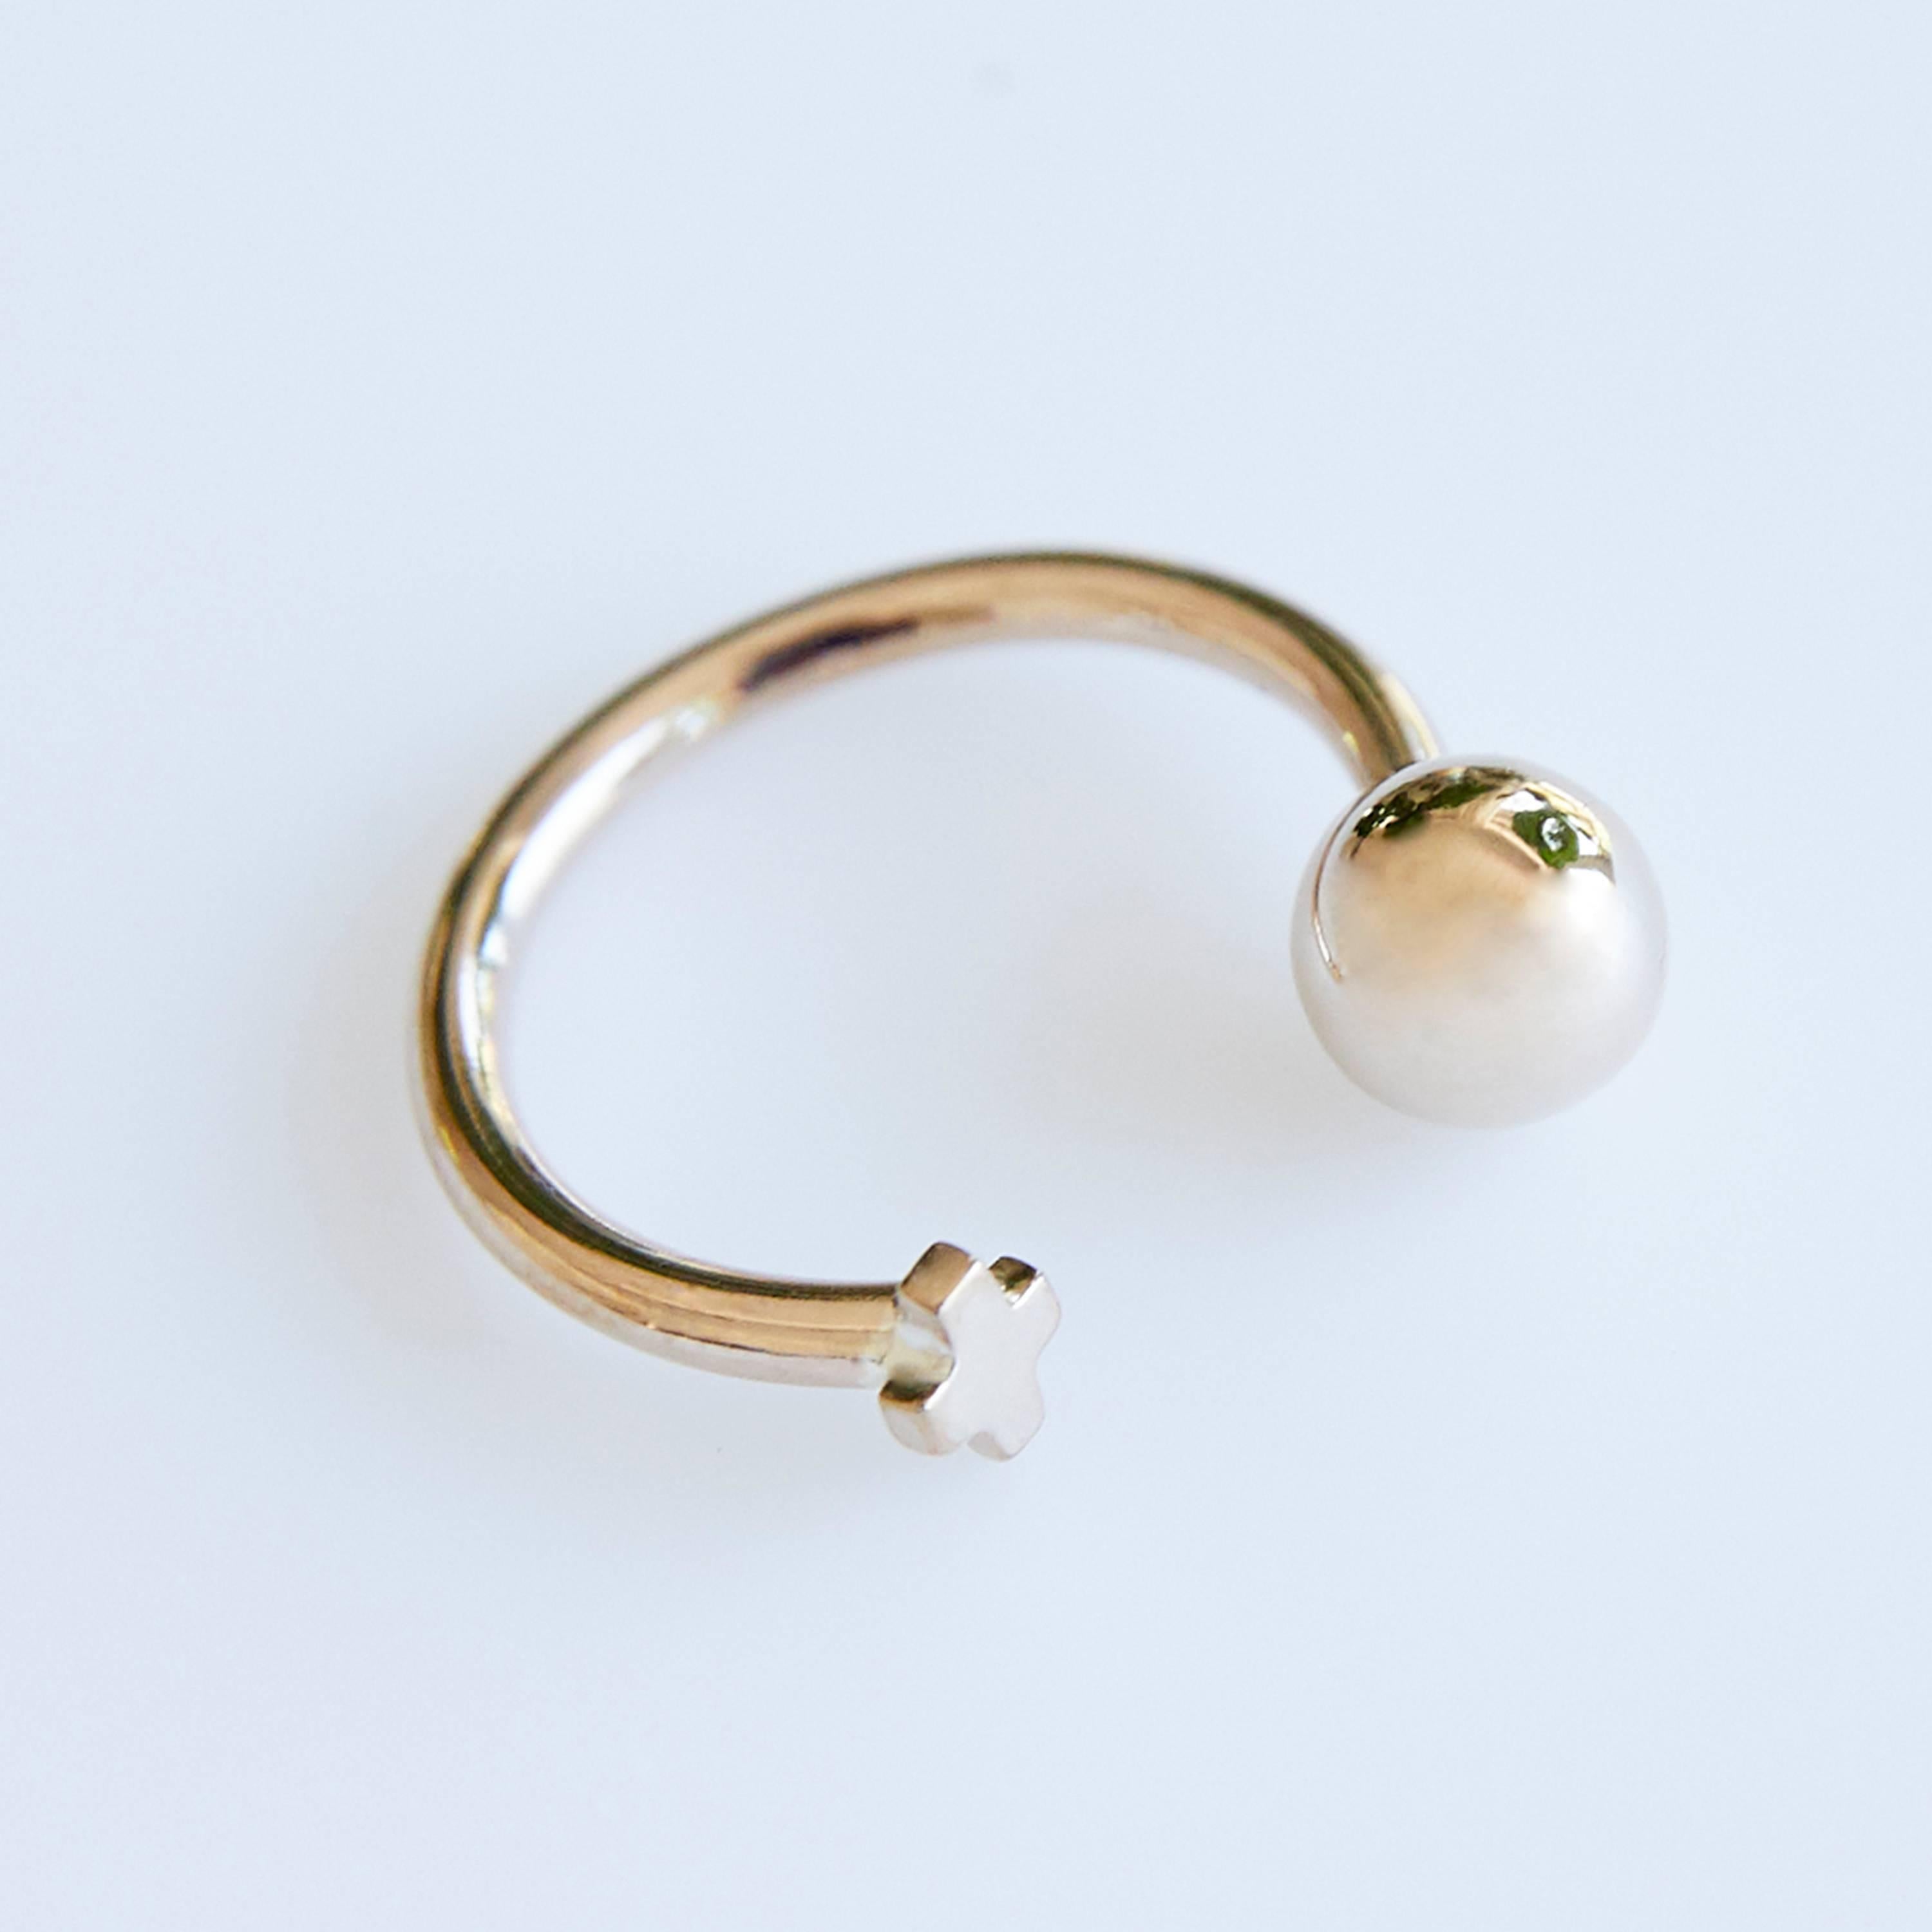 Uncut White Pearl Gold Ring Cross Adjustable Cocktail Ring J Dauphin For Sale